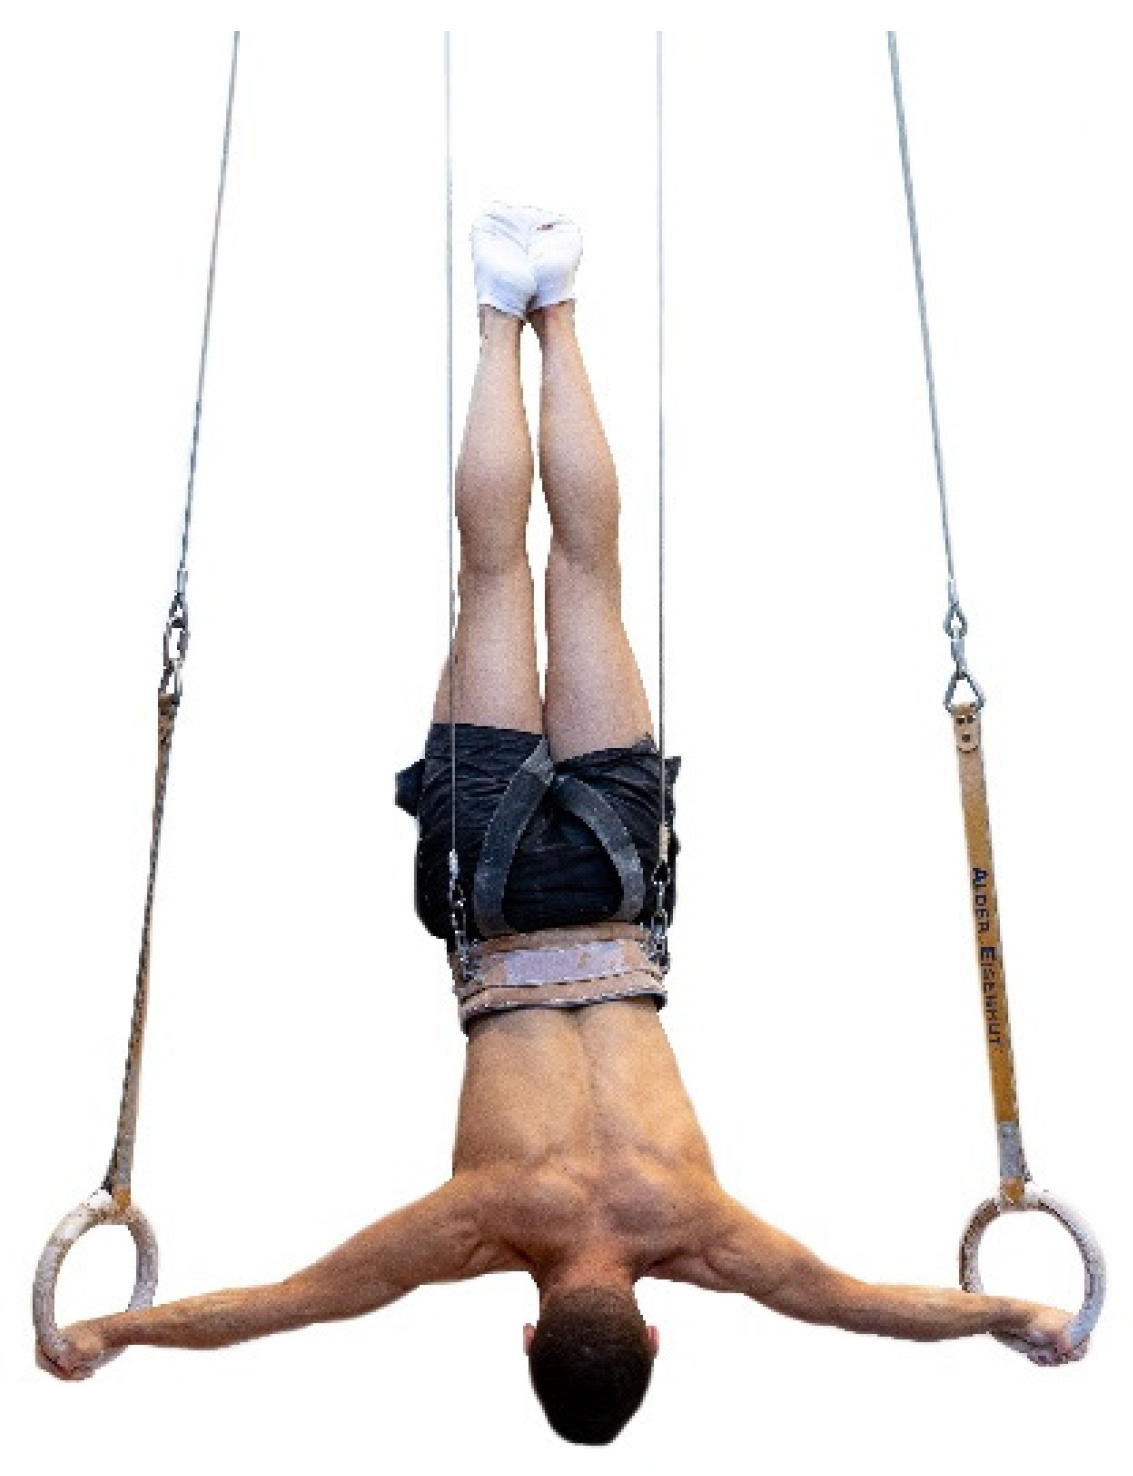 Beginners Guide To Training On Gymnastic Rings - Gravity Fitness Equipment